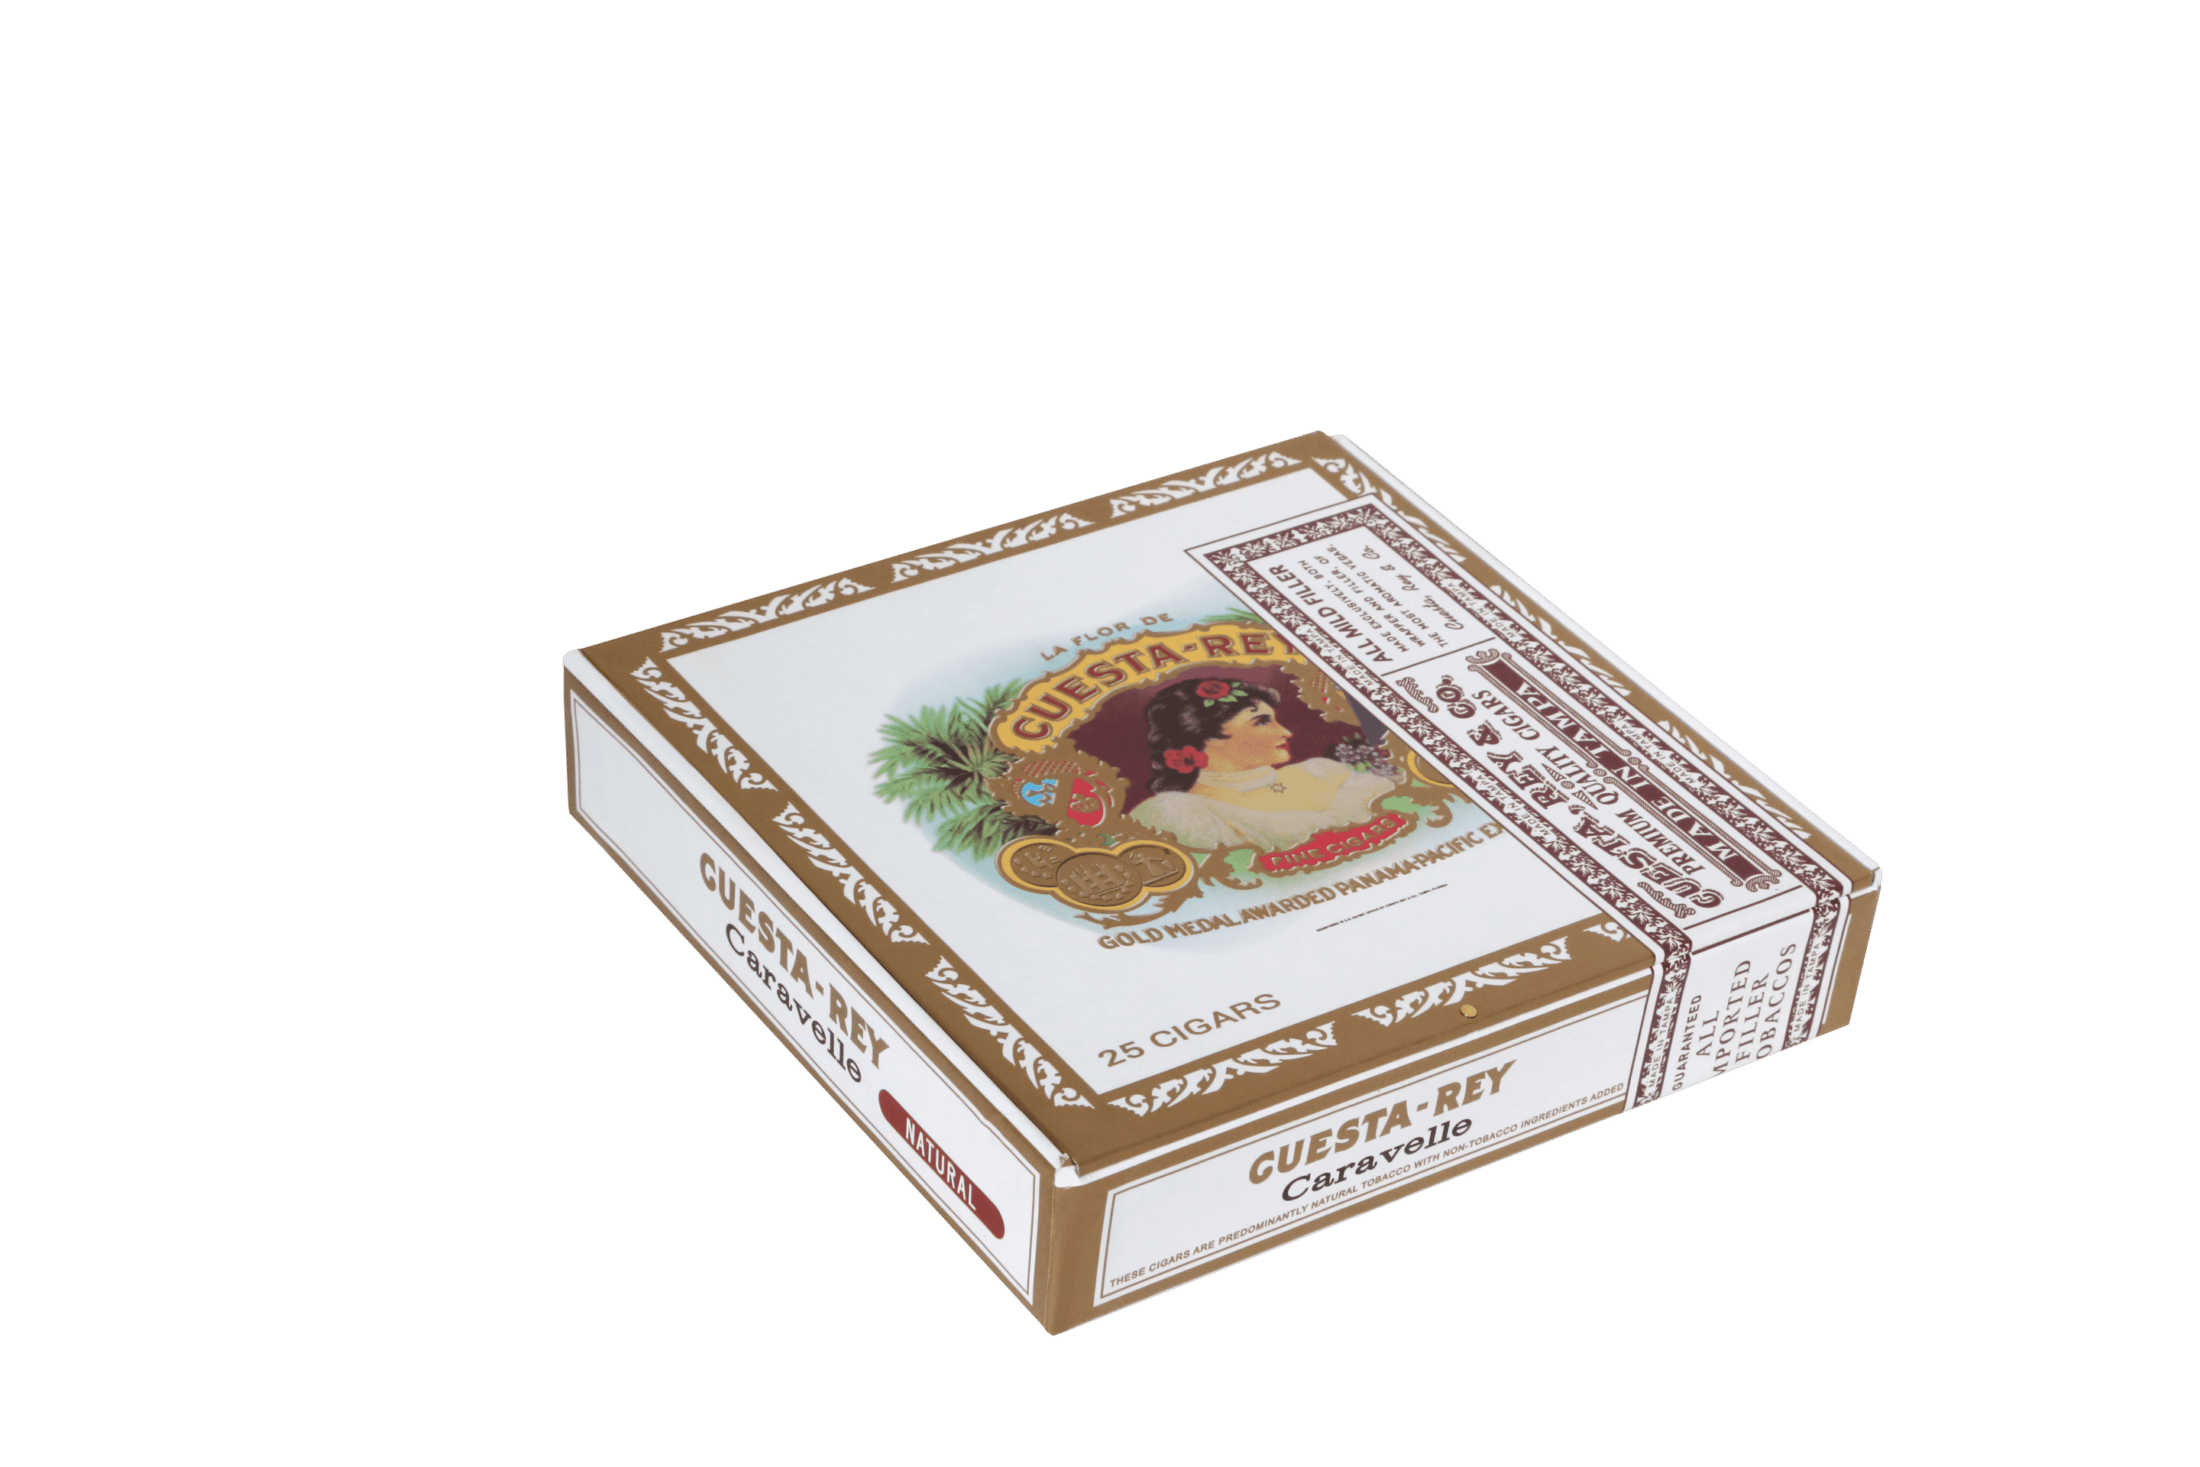 Closed box of 25 count Cuesta-Rey Caravelle cigars